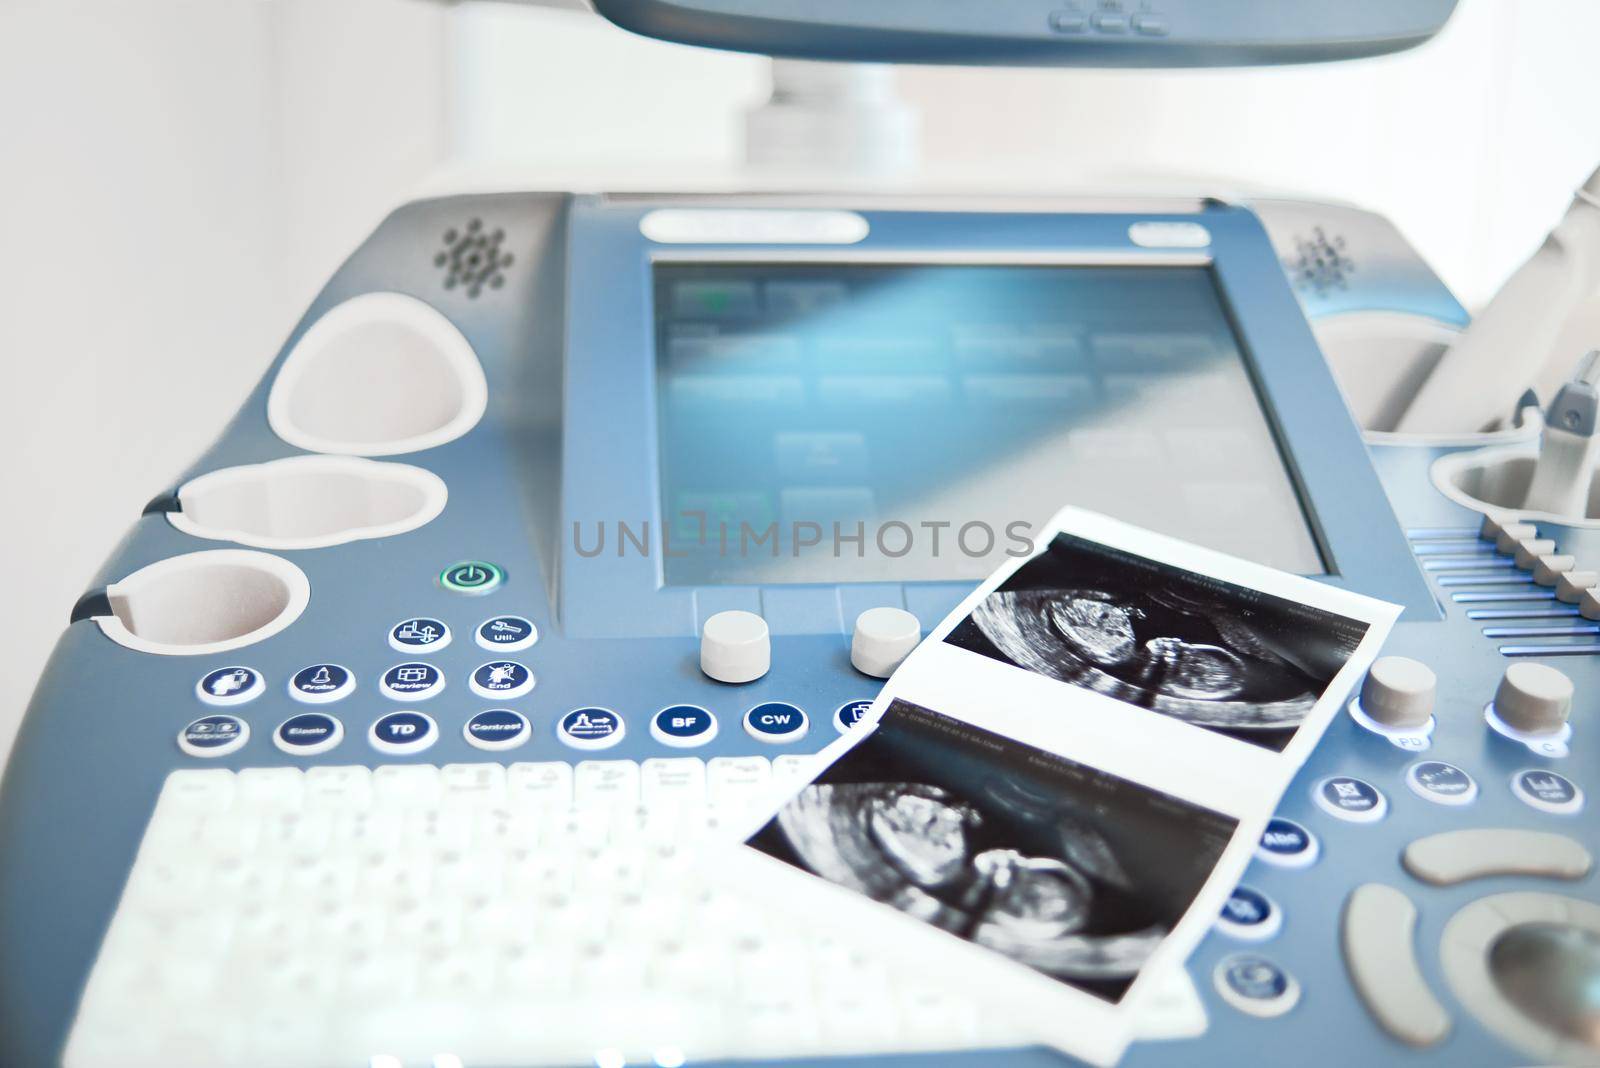 Ultrasound scanning machine at the clinic by SerhiiBobyk